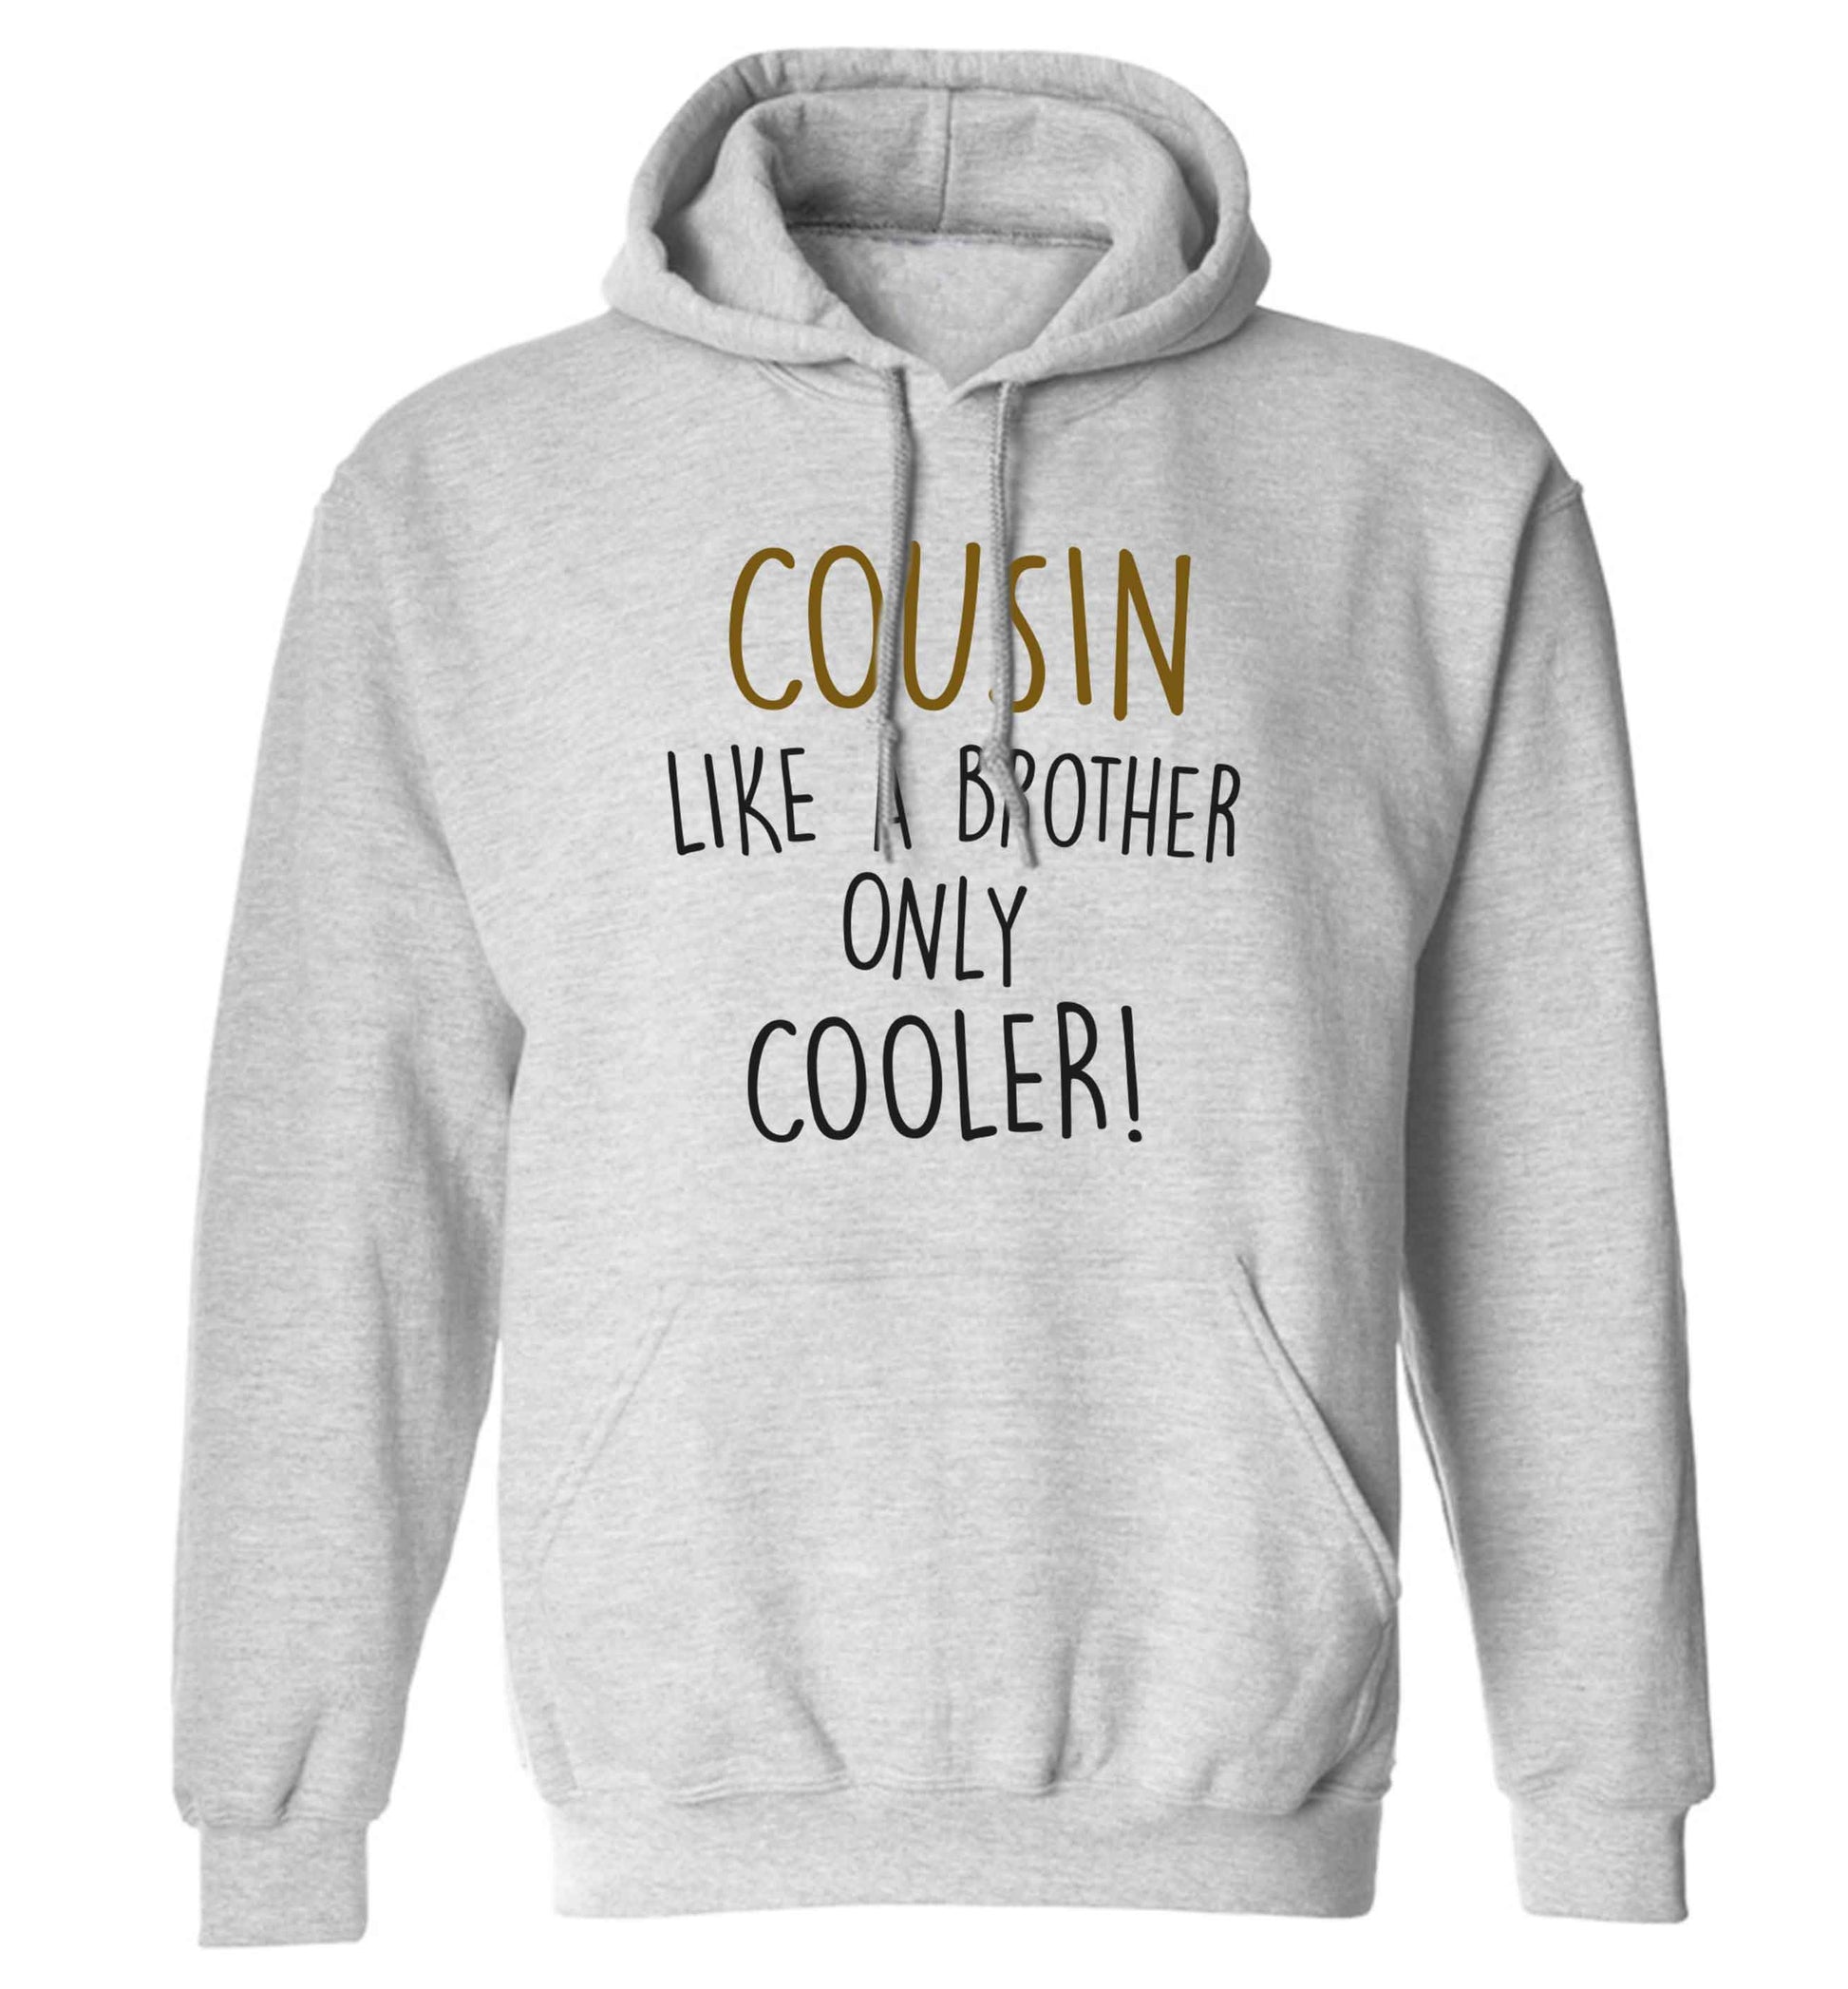 Cousin like a brother only cooler adults unisex grey hoodie 2XL